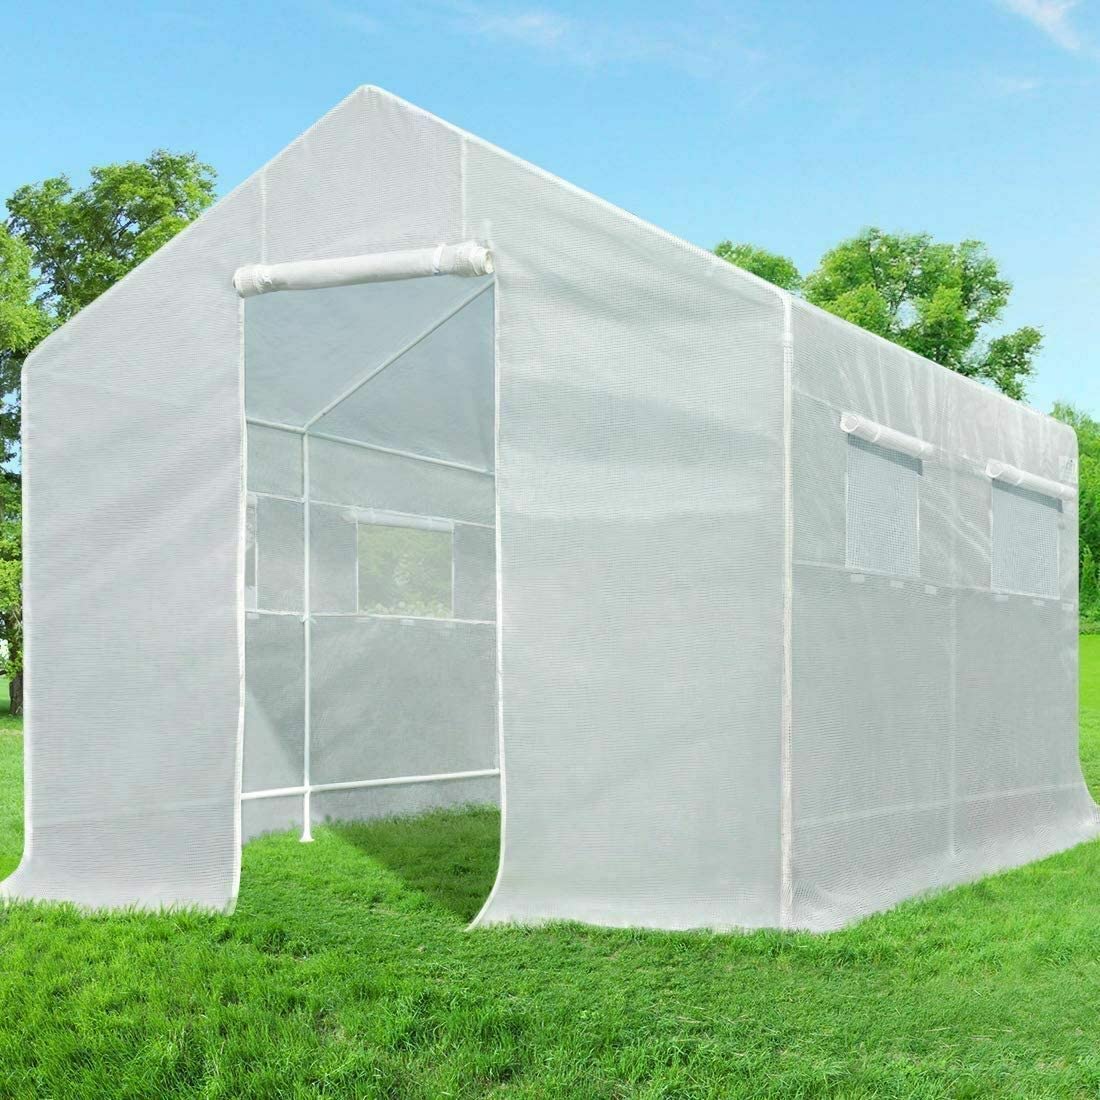 Review of Quictent 10x9x8 ft Portable Tunnel Greenhouse